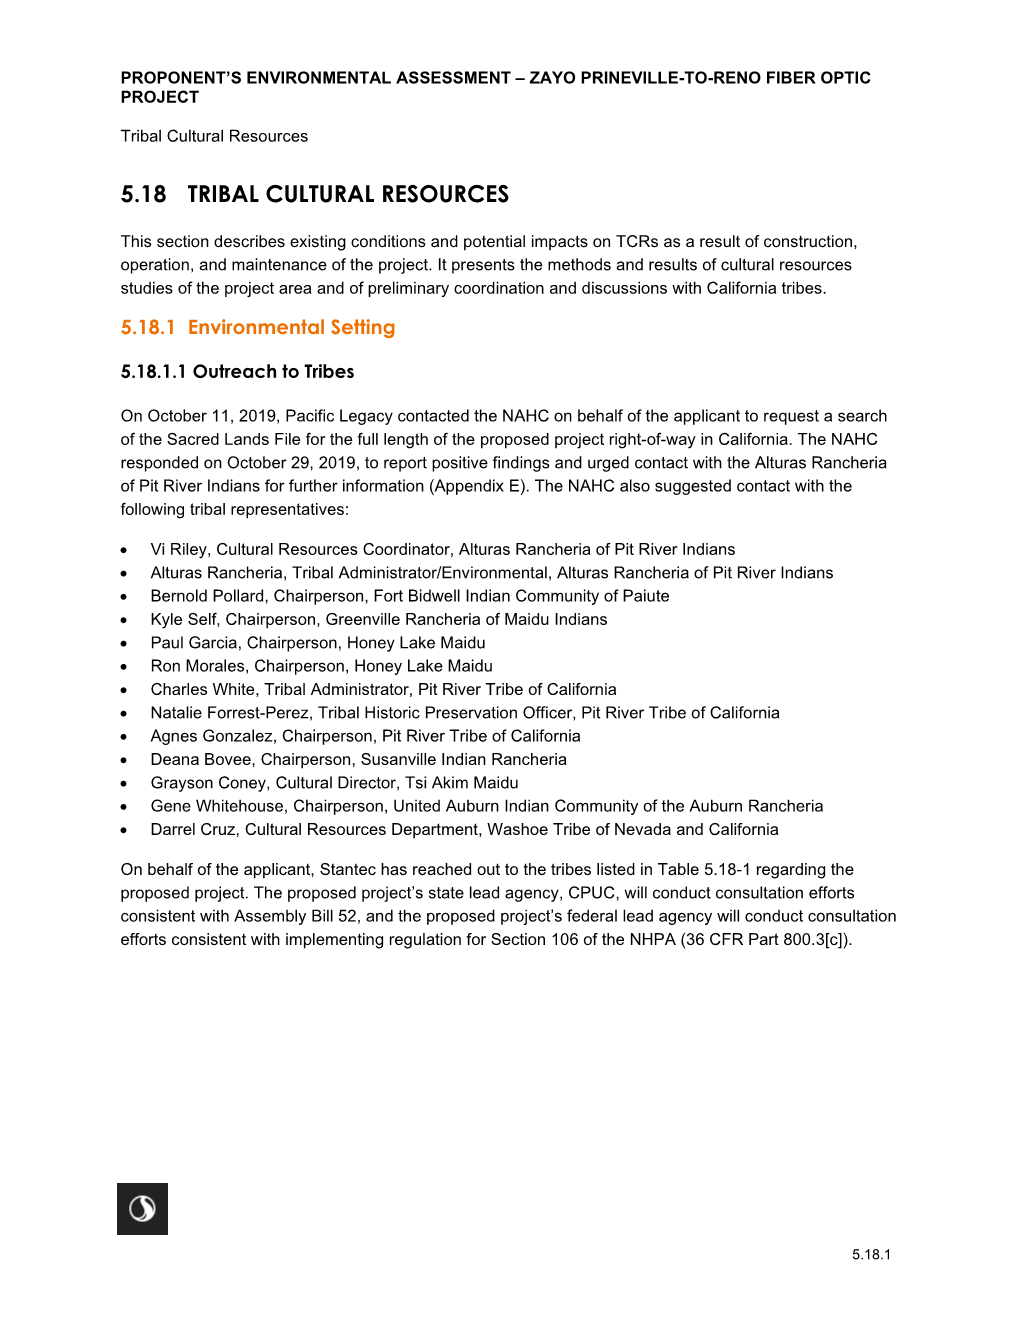 Tribal Cultural Resources